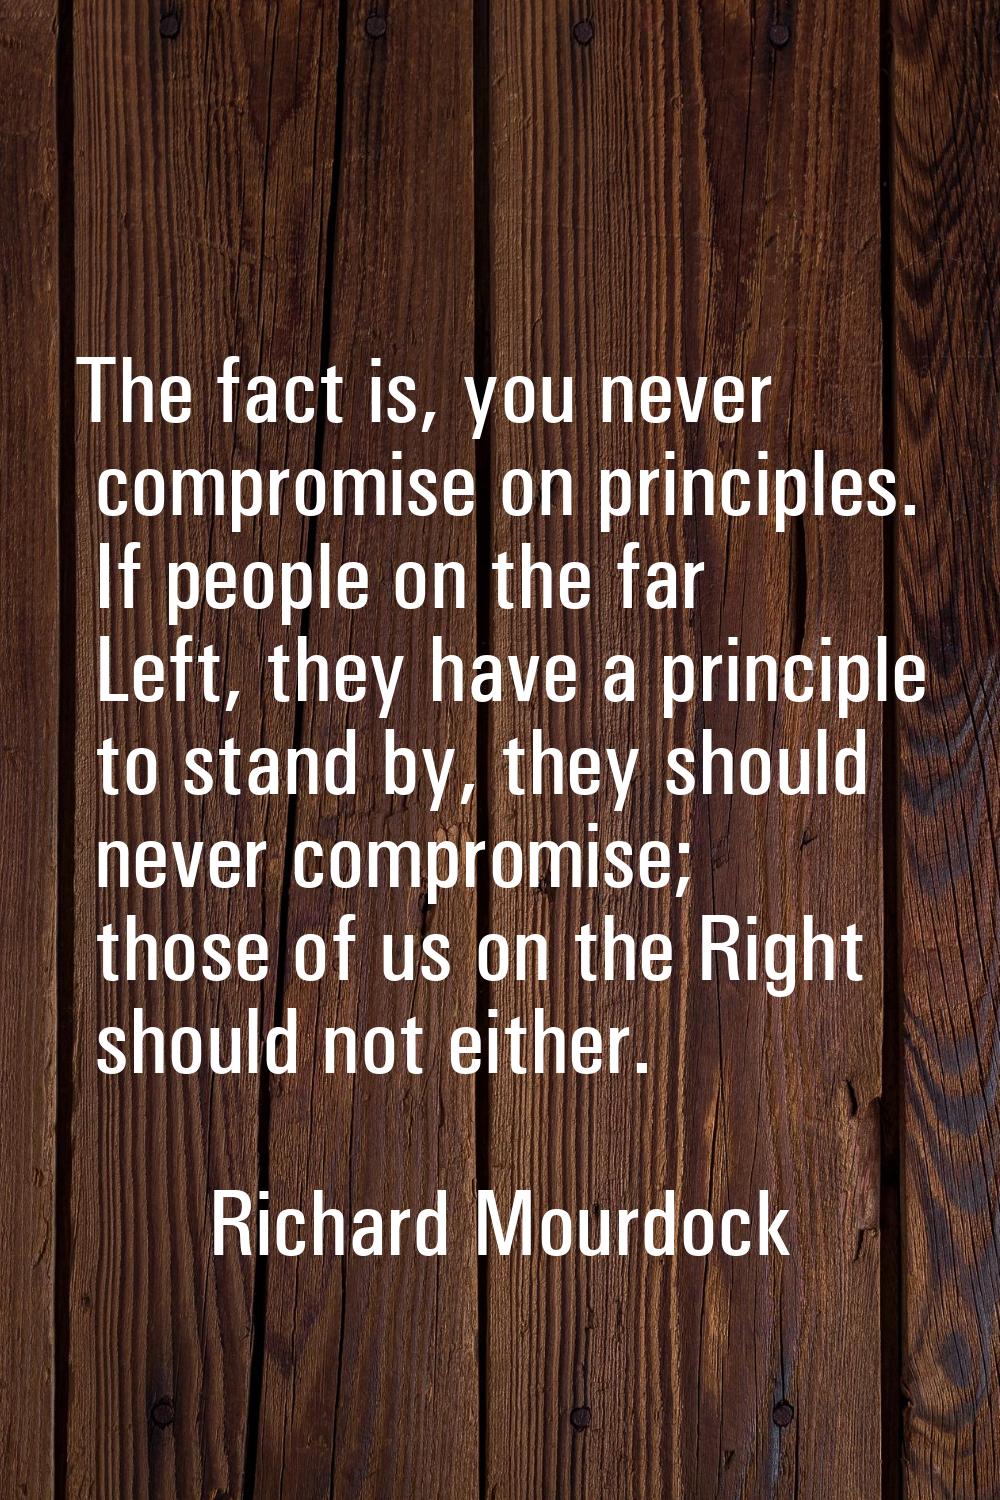 The fact is, you never compromise on principles. If people on the far Left, they have a principle t